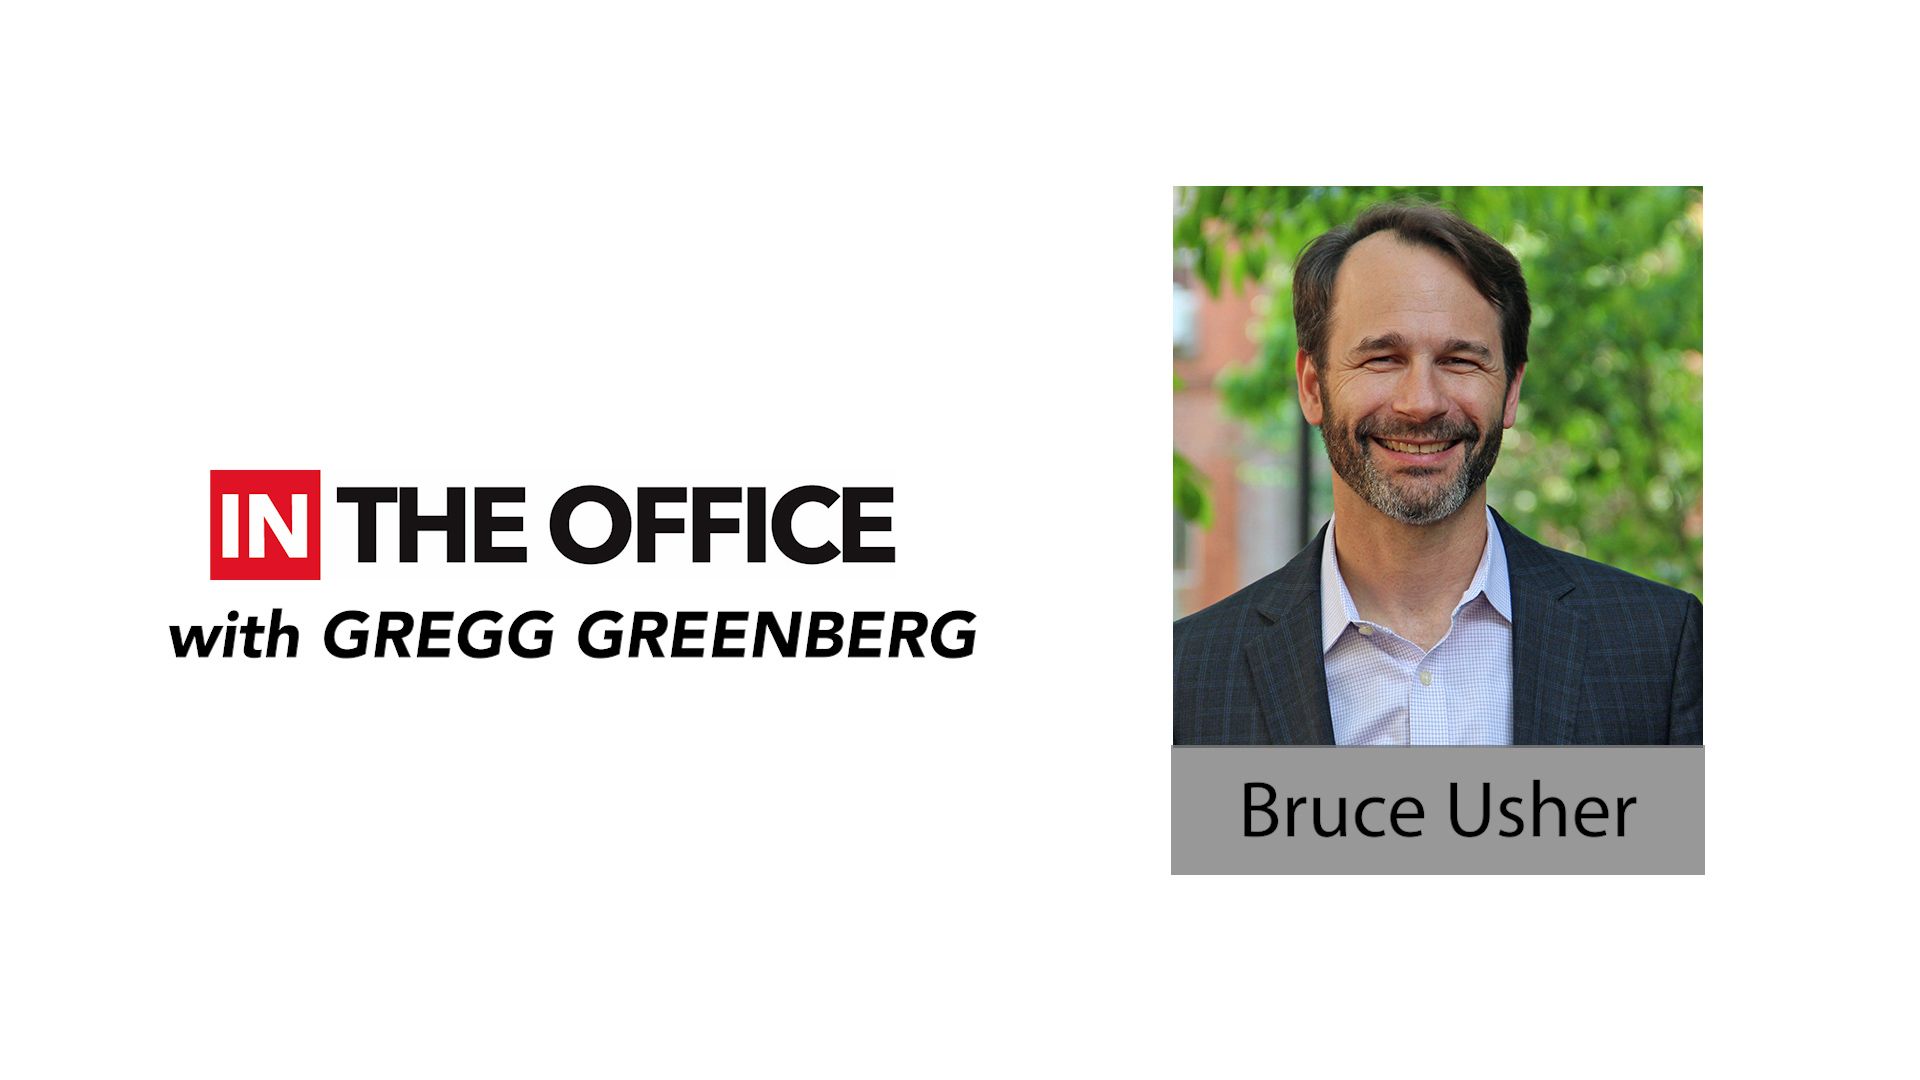 ‘IN the Office’ with ESG expert and author Bruce Usher